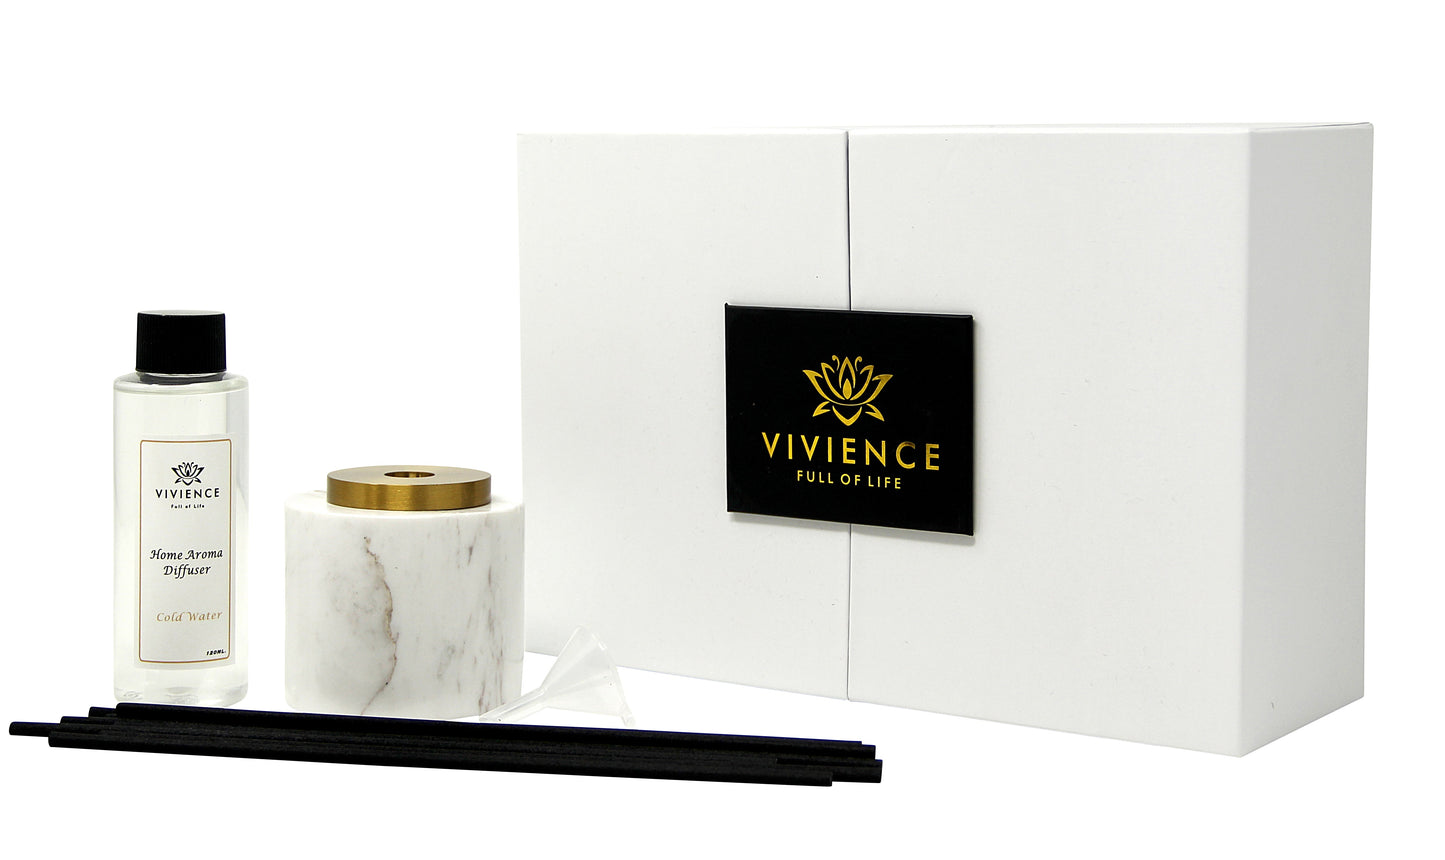 White Marble Reed Diffuser, "White Flower" Scent